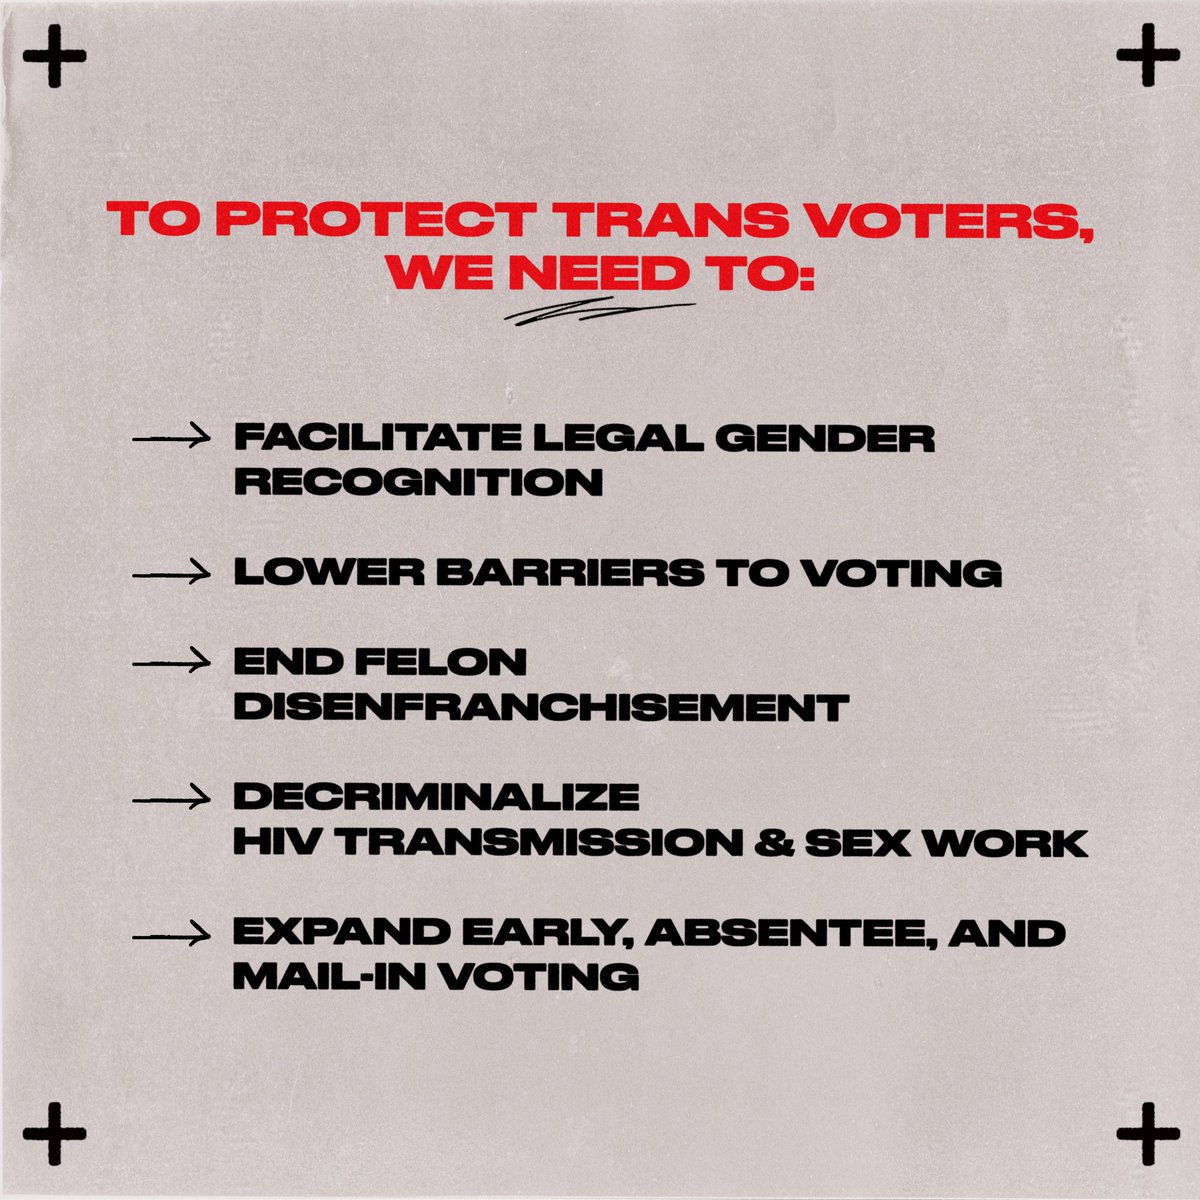 Voter suppression within the transgender community is a very real threat to equality at the polls. Swipe to learn more, and please register to vote! vote.org